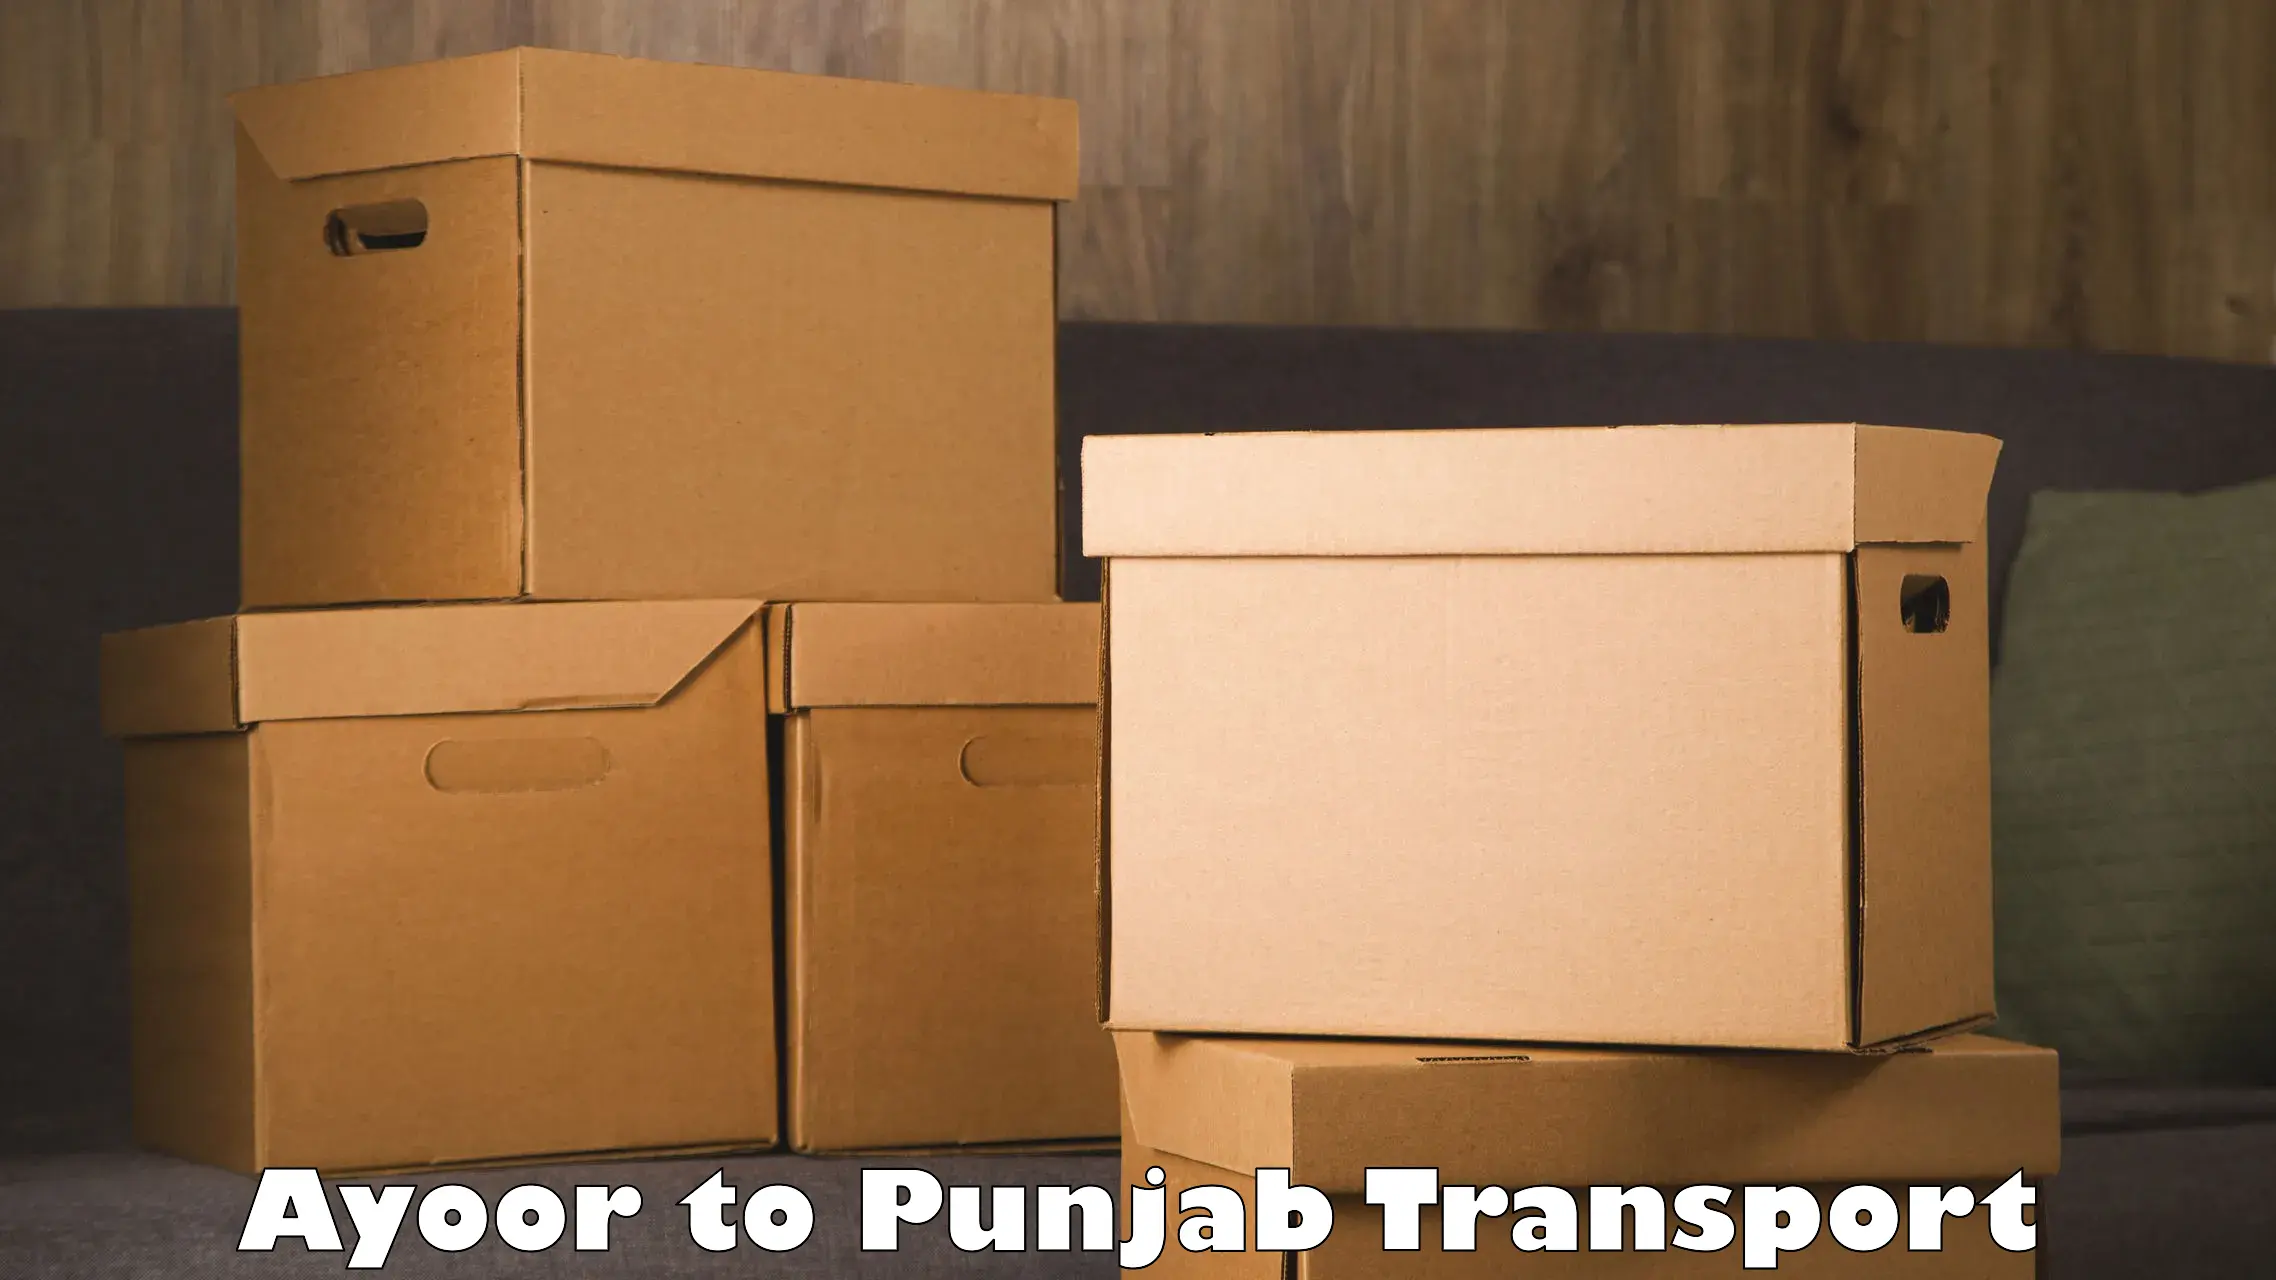 Commercial transport service Ayoor to Punjab